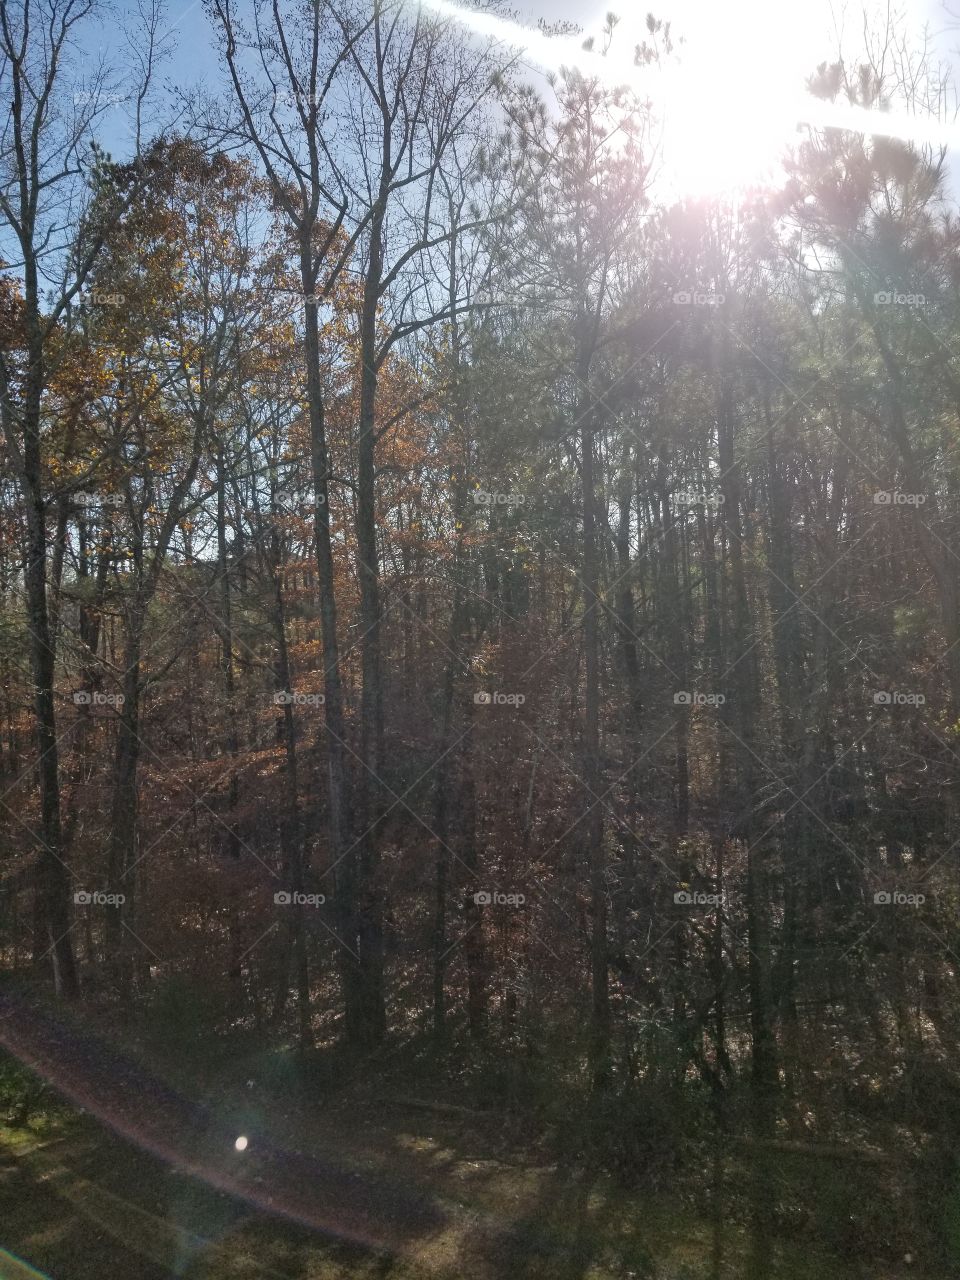 sunny fall sky, leaves falling as the sun dries them from the morning rain